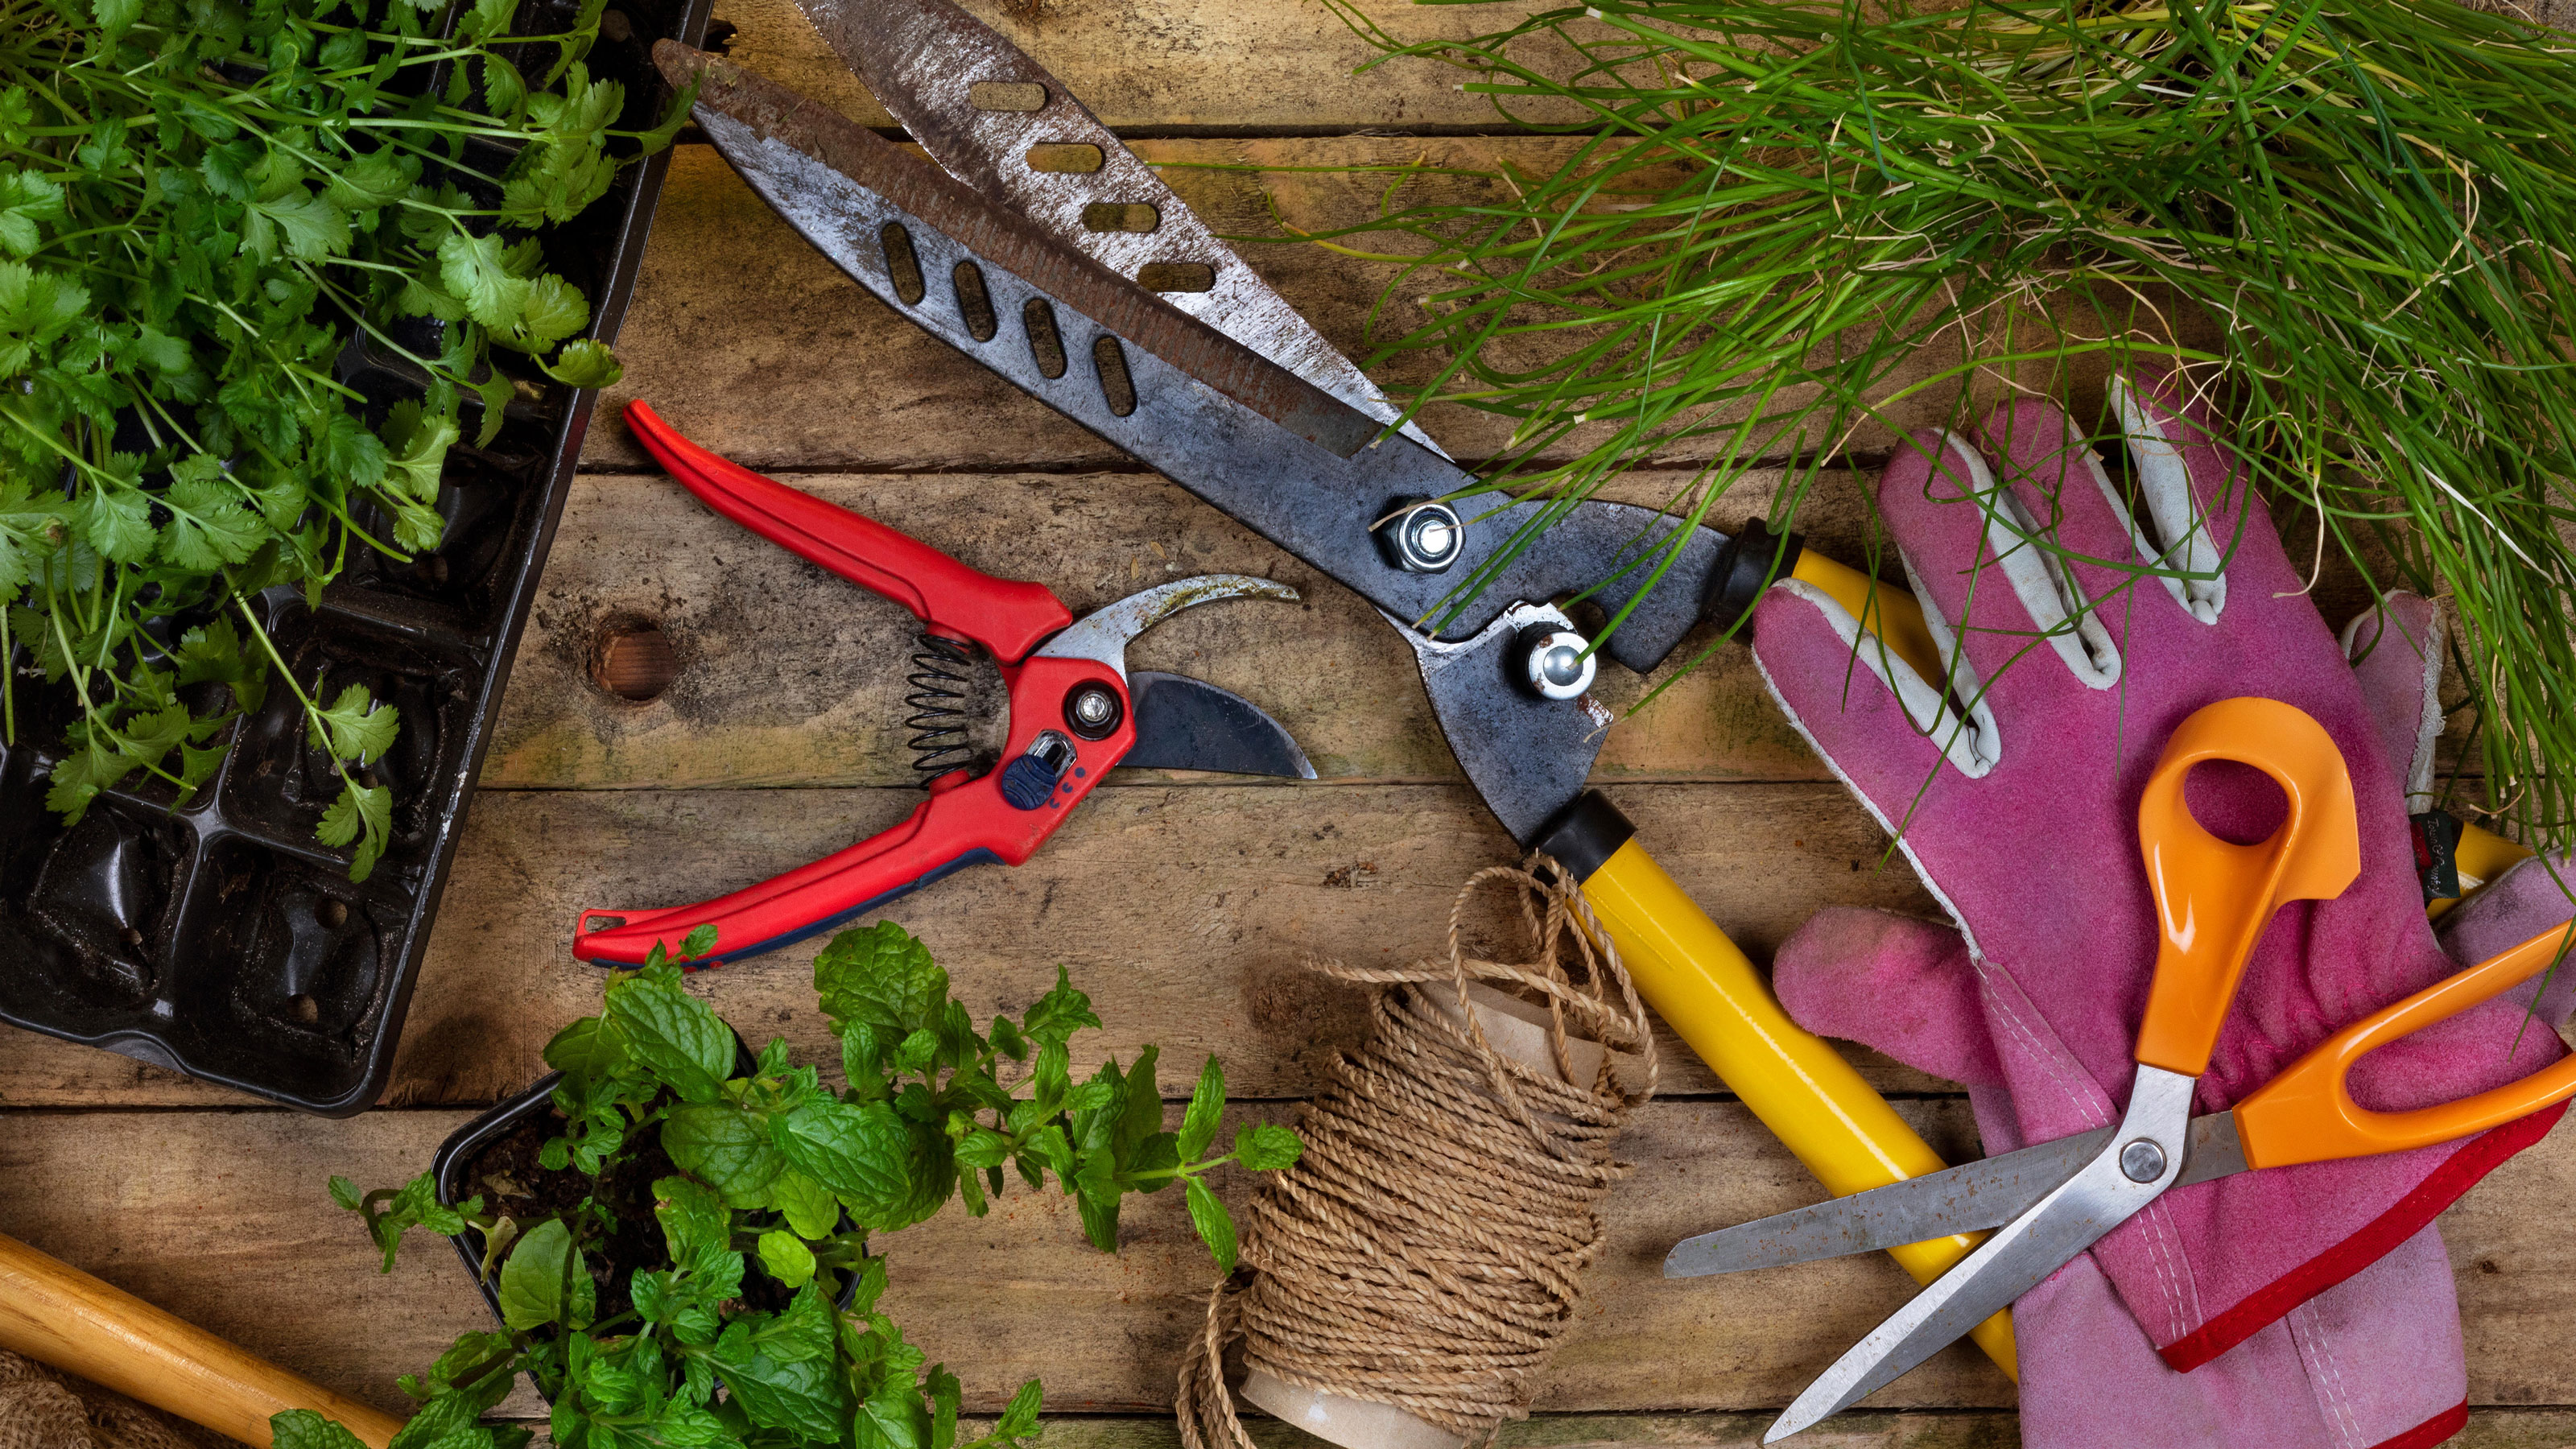 To Open up the Tree, Use Pruning Shears to Cut New Shoots